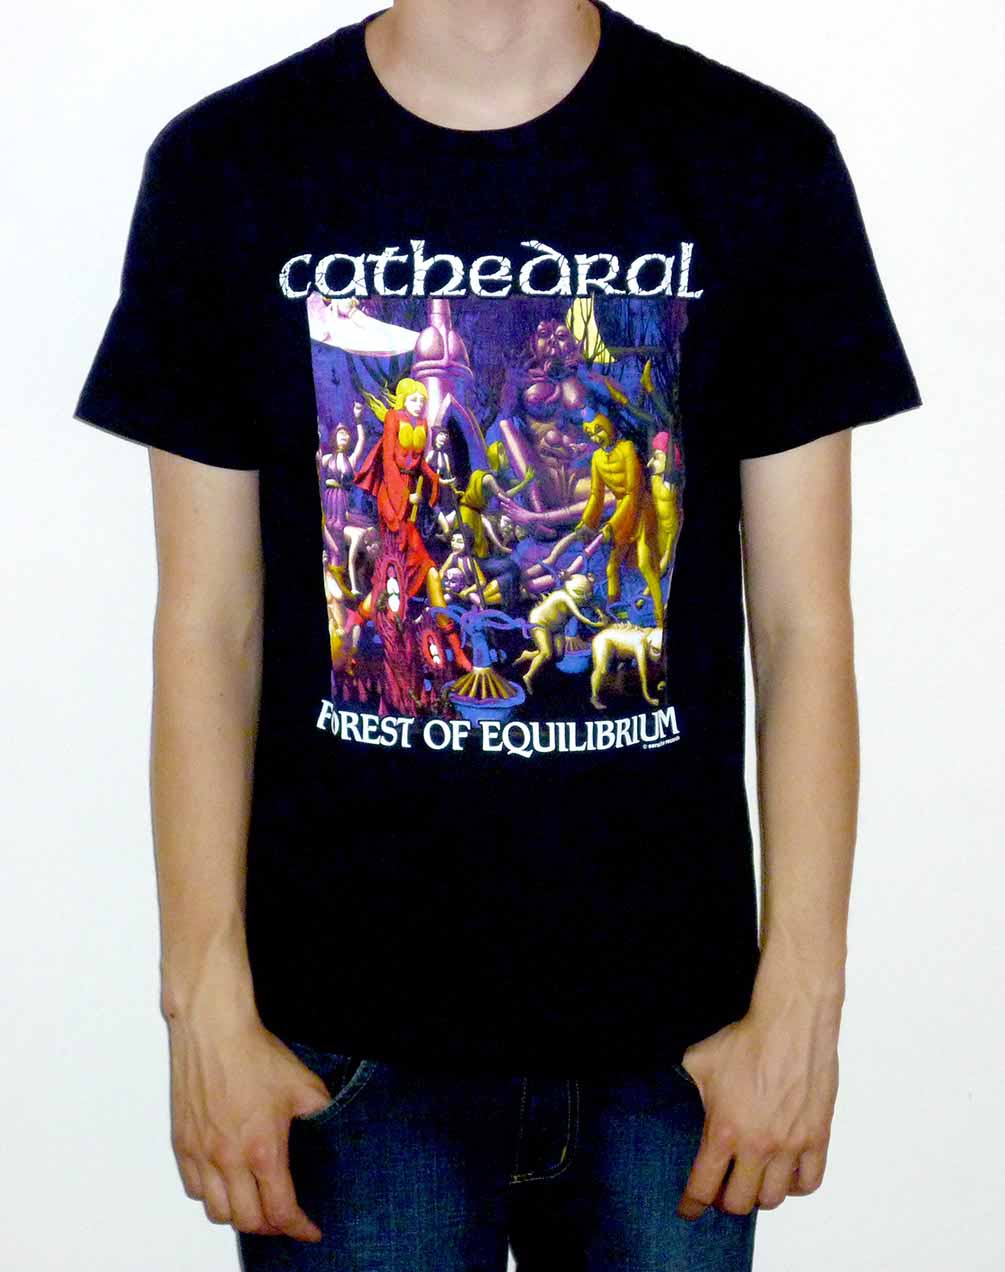 Cathedral "Forest Of Equilibrium" T-shirt